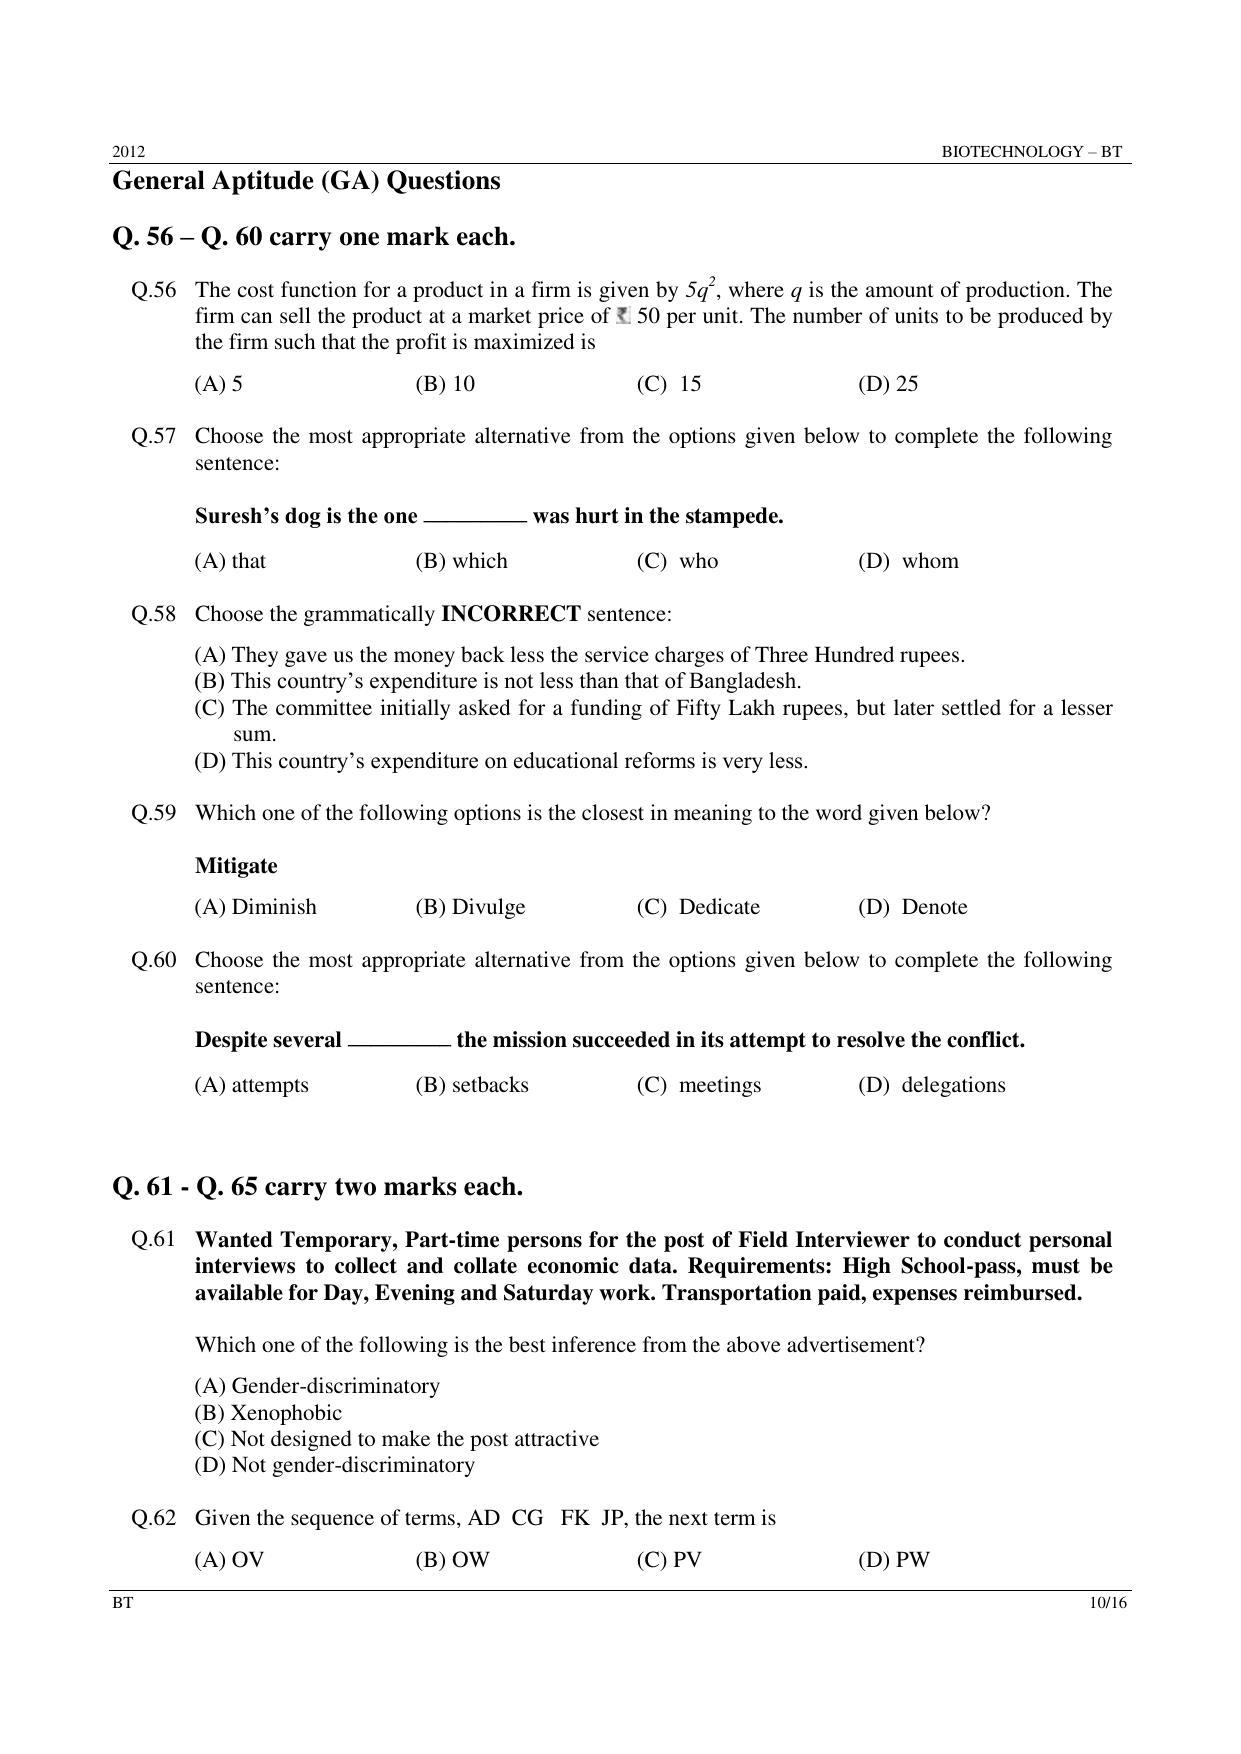 GATE 2012 Biotechnology (BT) Question Paper with Answer Key - Page 10